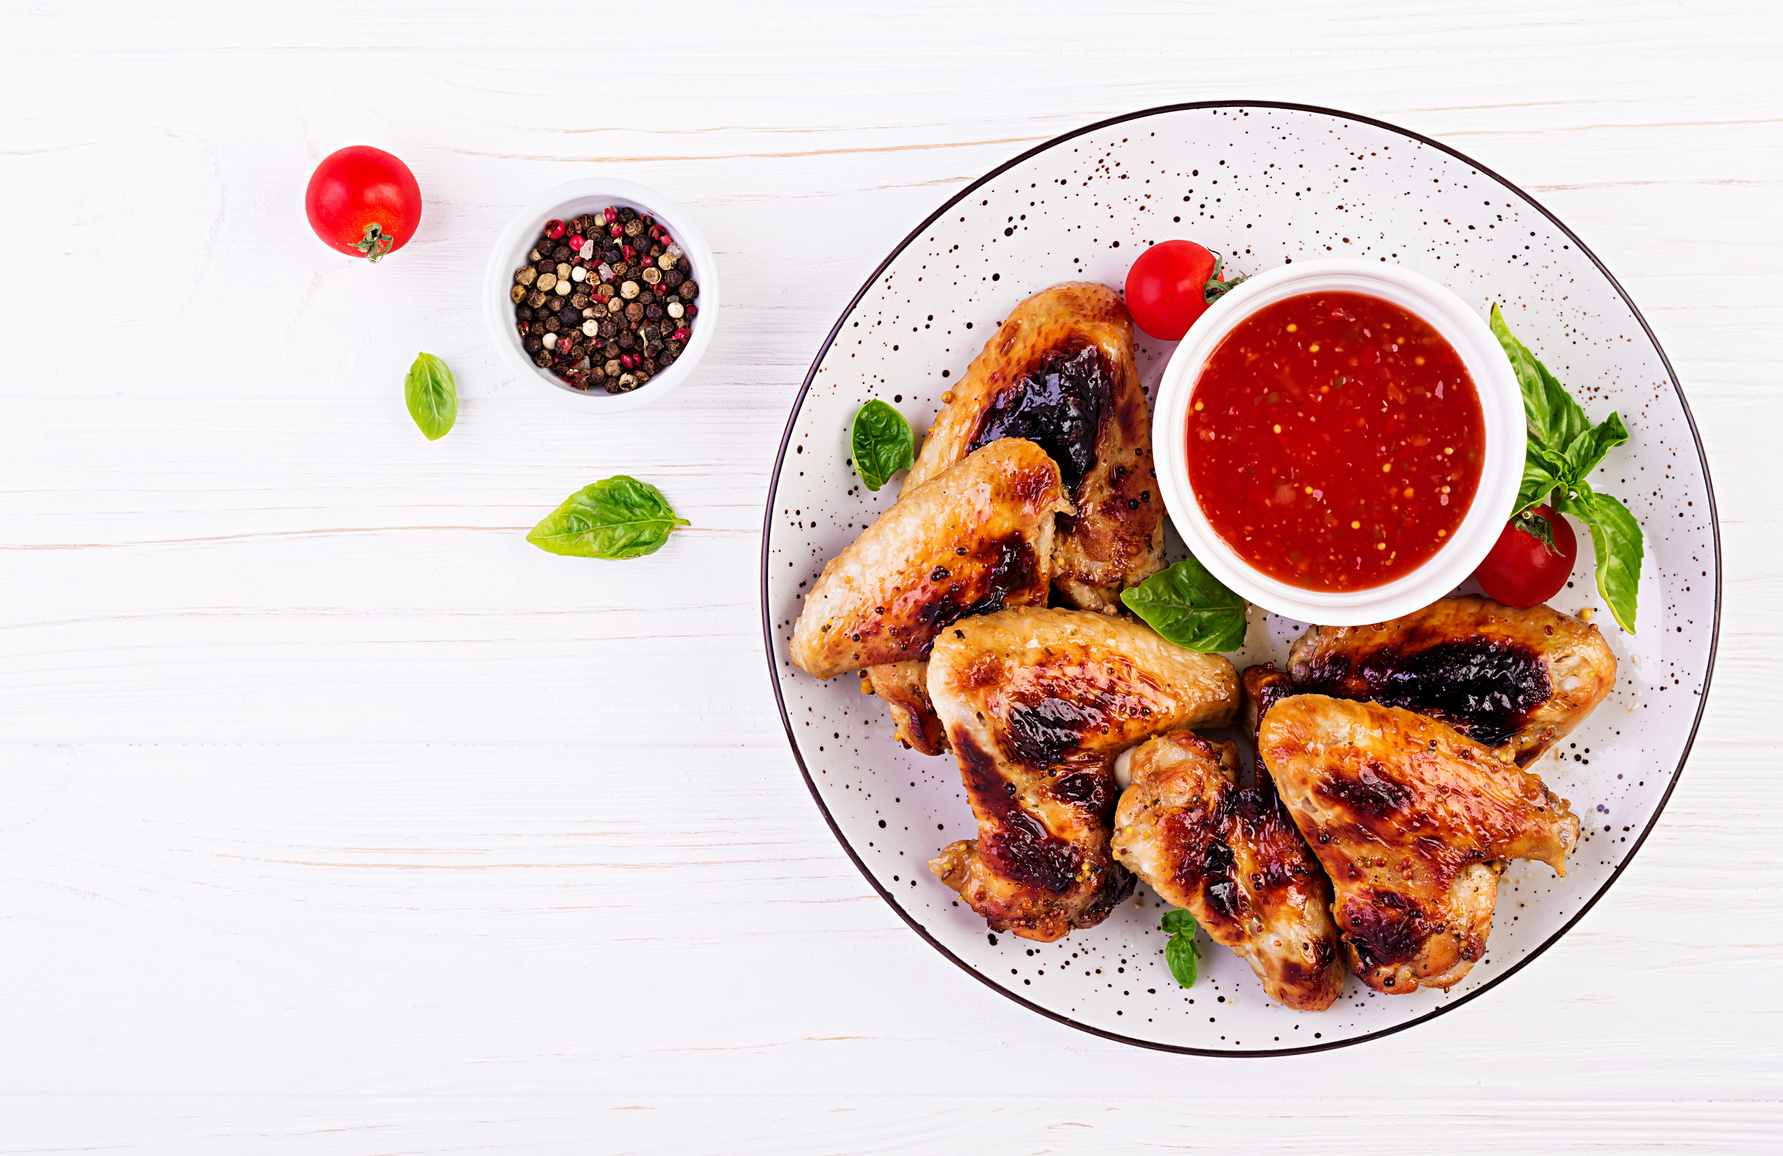 Baked Chicken Wings with Chili Sauce